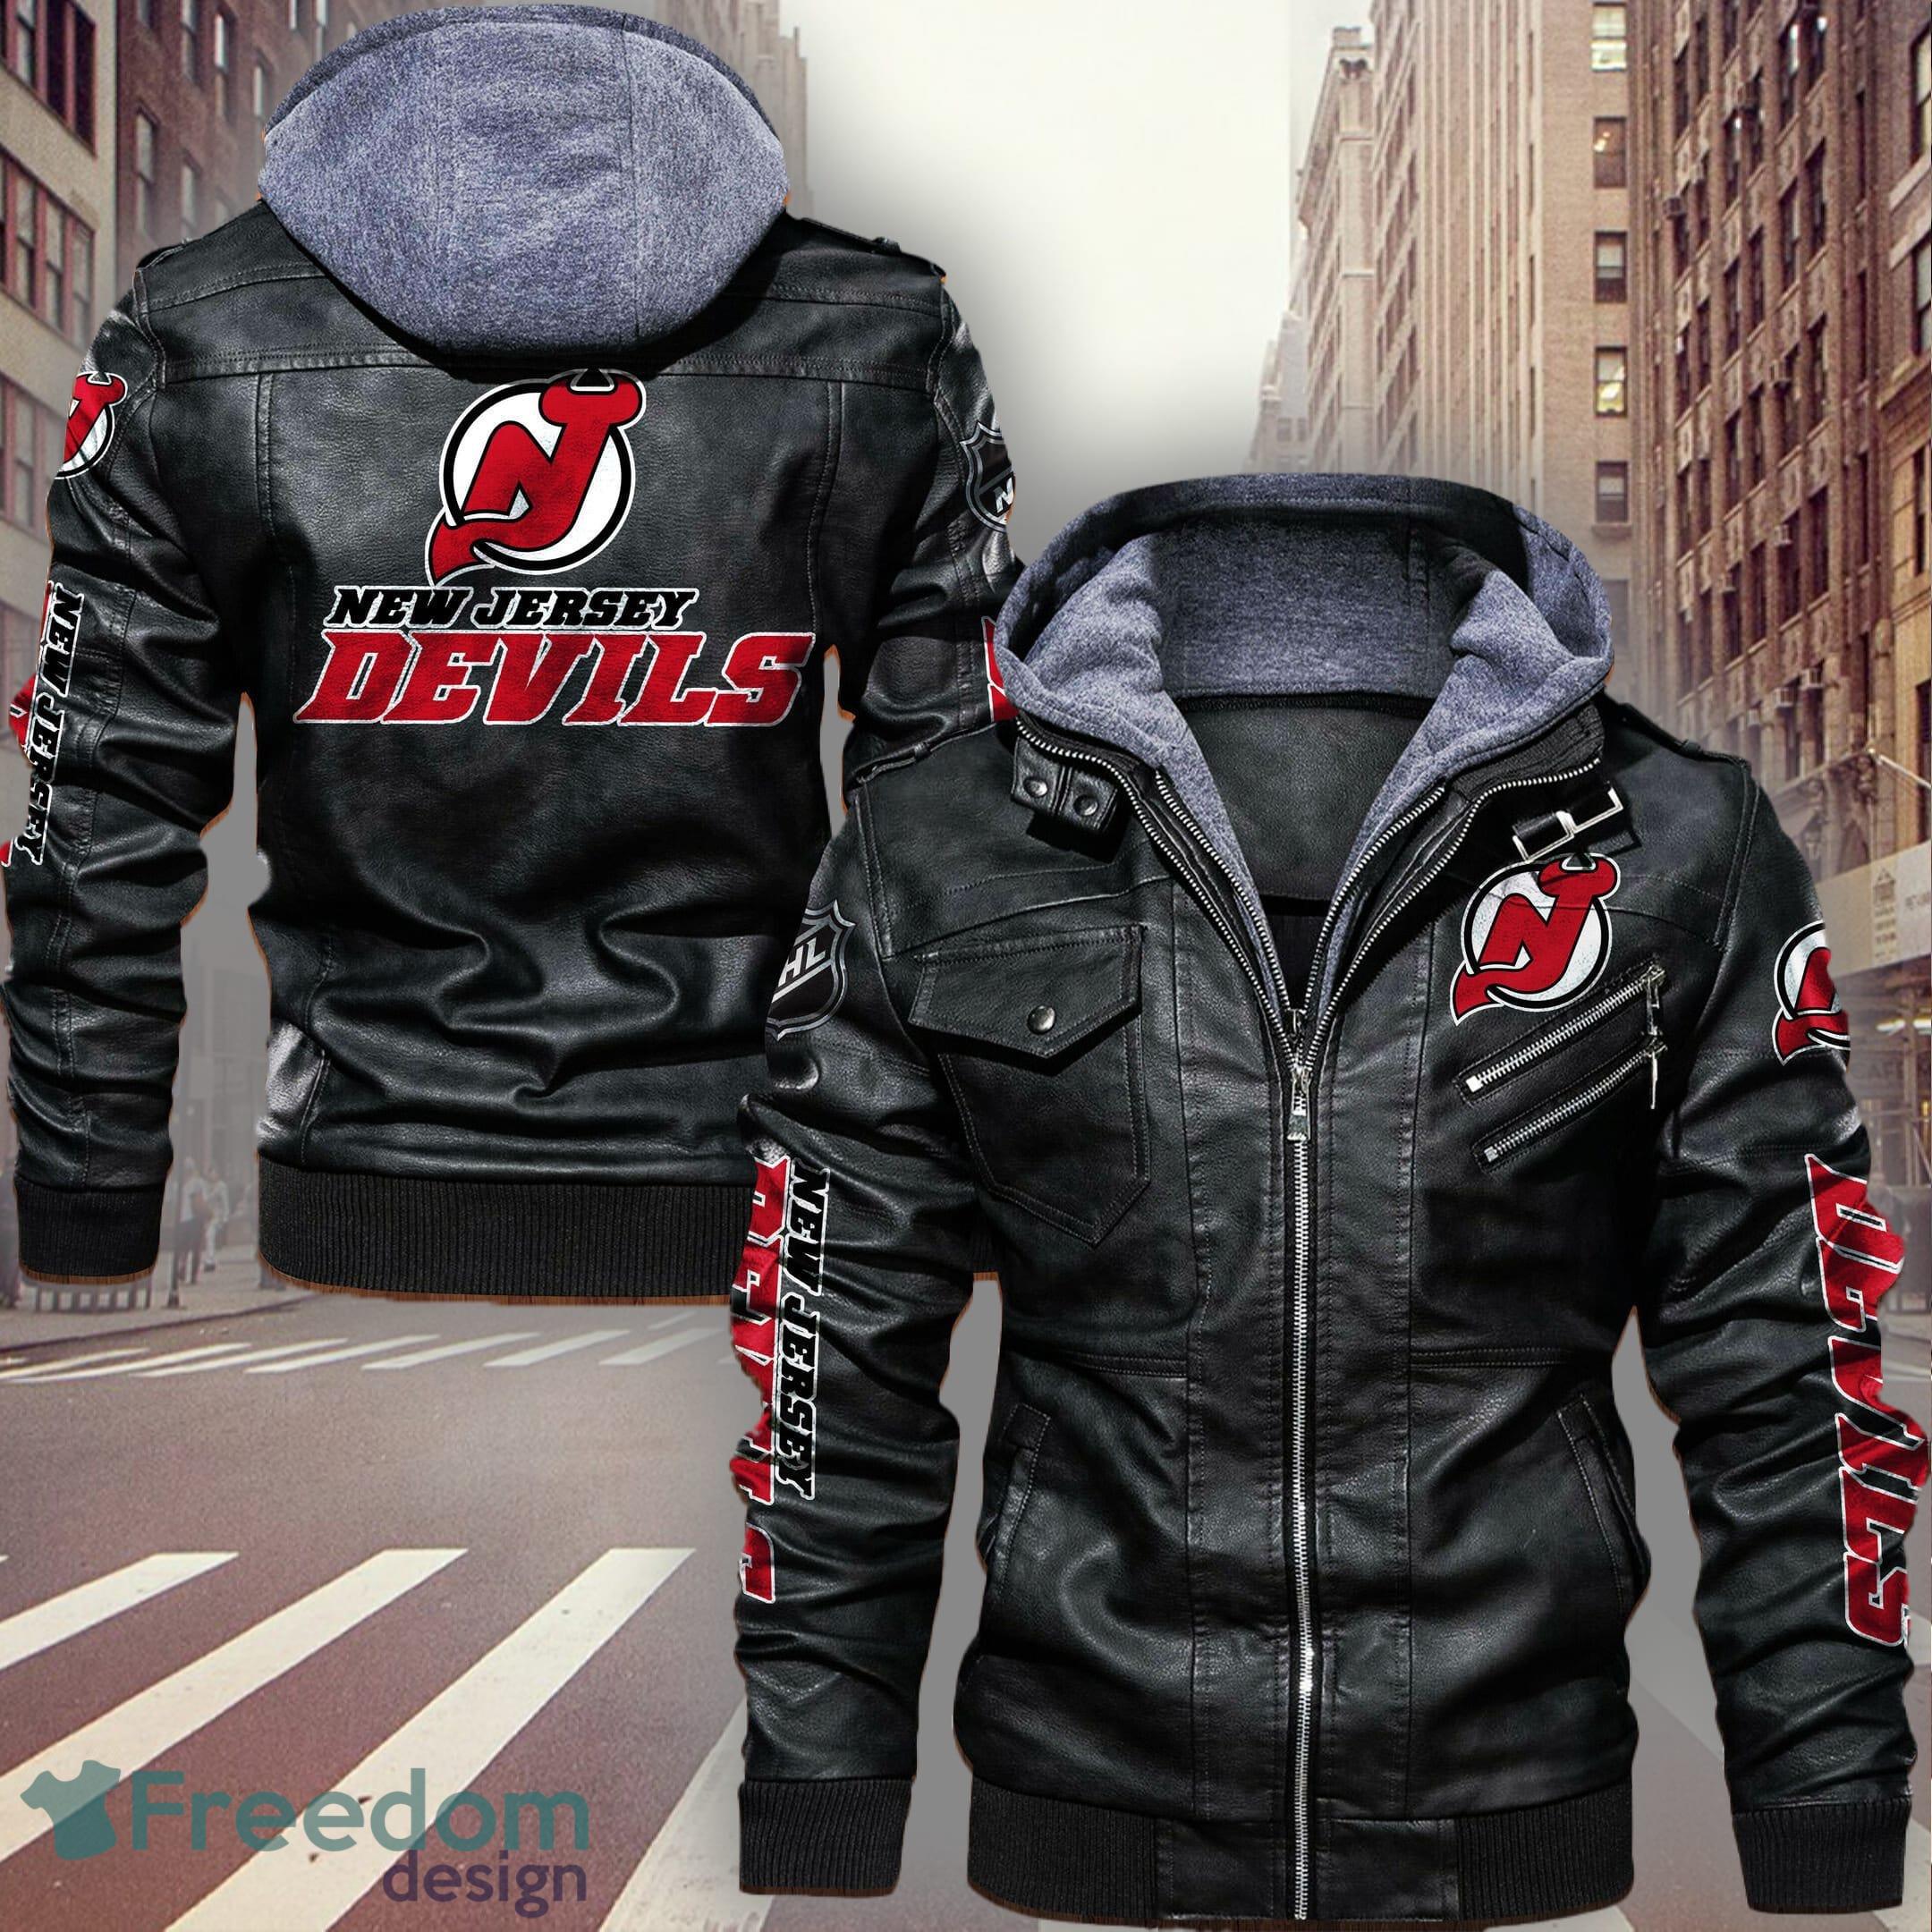 NHL New Jersey Devils Max Soul Shoes Custom Name For NHL Fans Running Shoes  - Freedomdesign